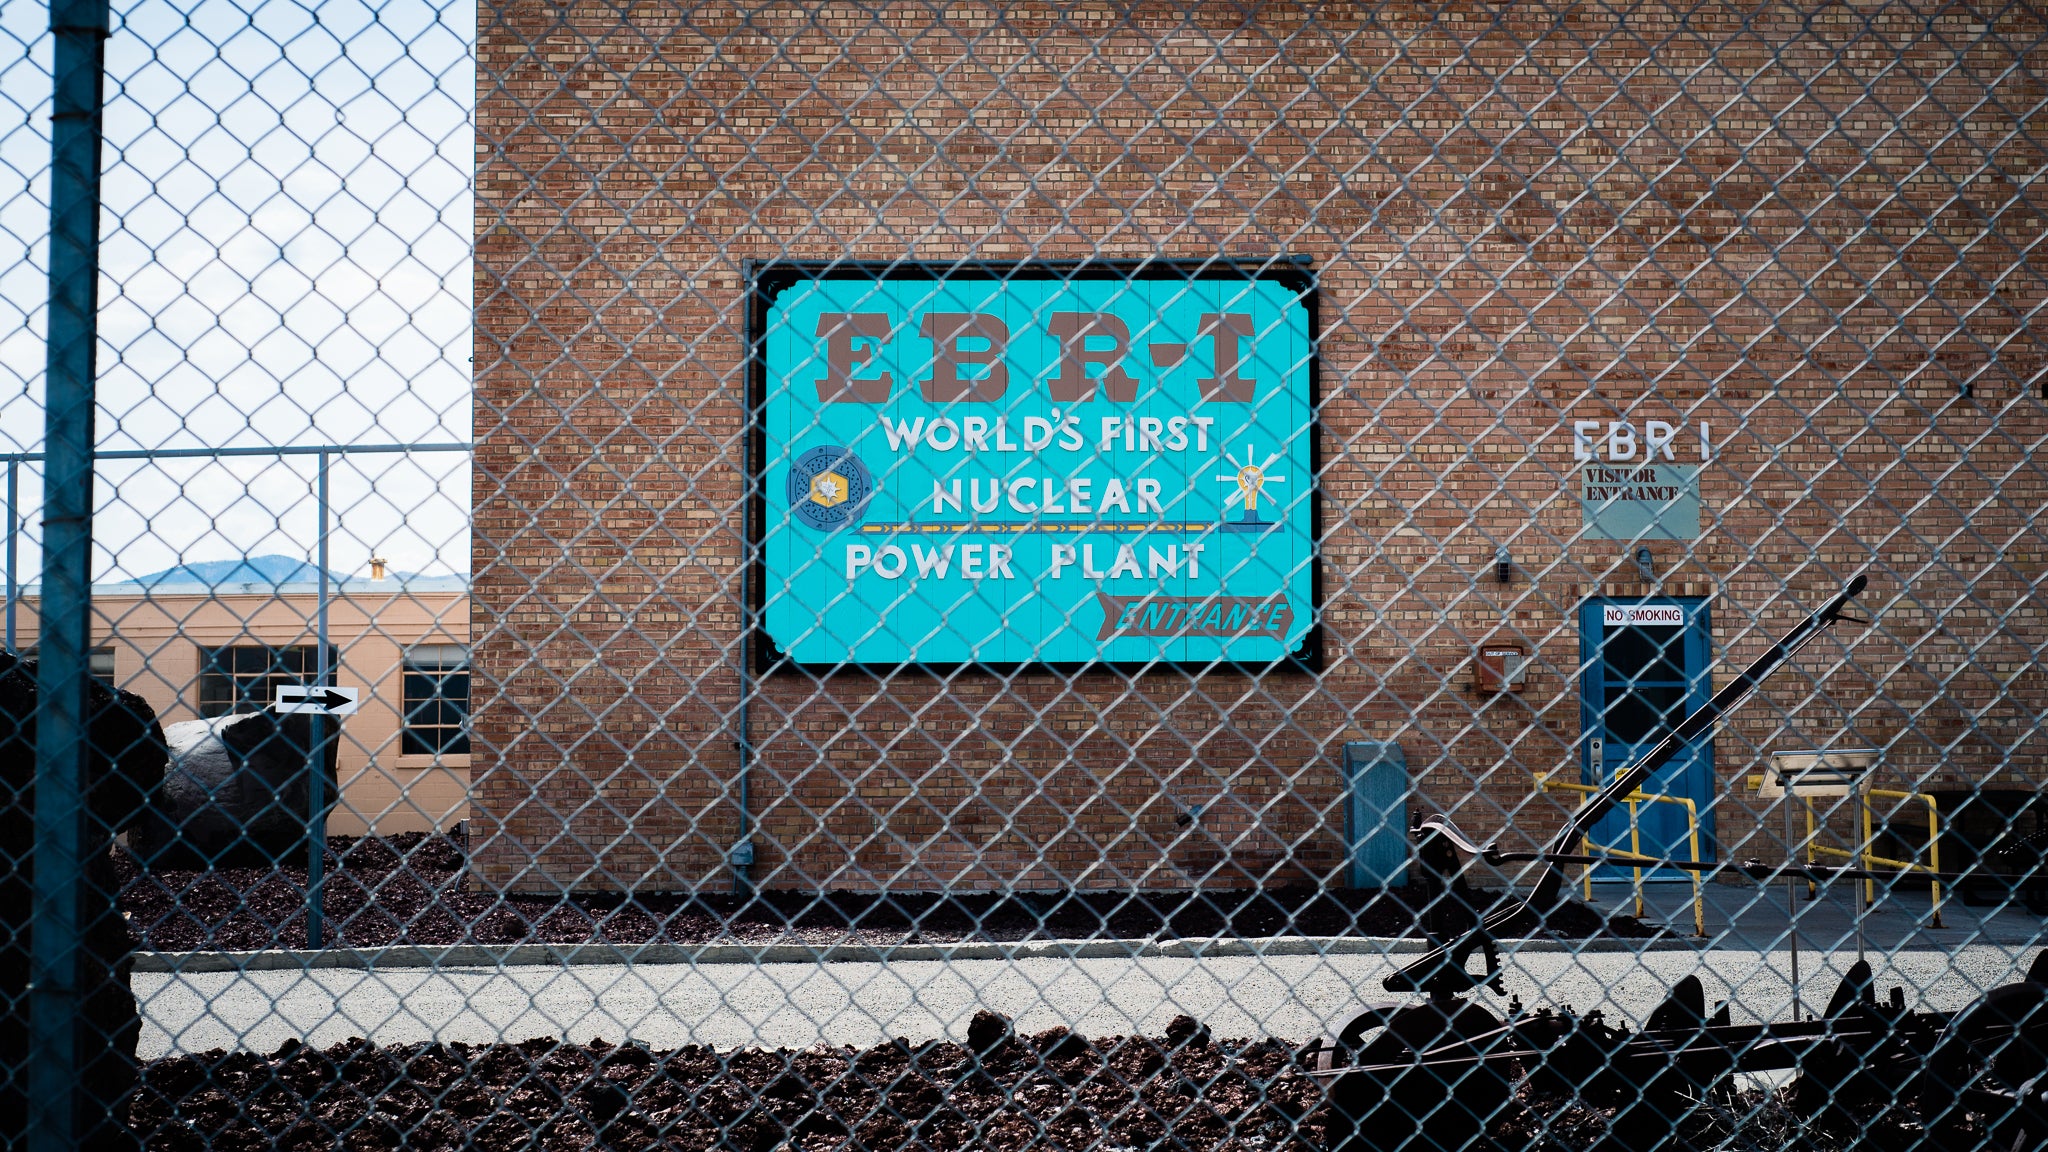 Entrance sign for EBR-1. The Worlds First Nuclear Reactor.